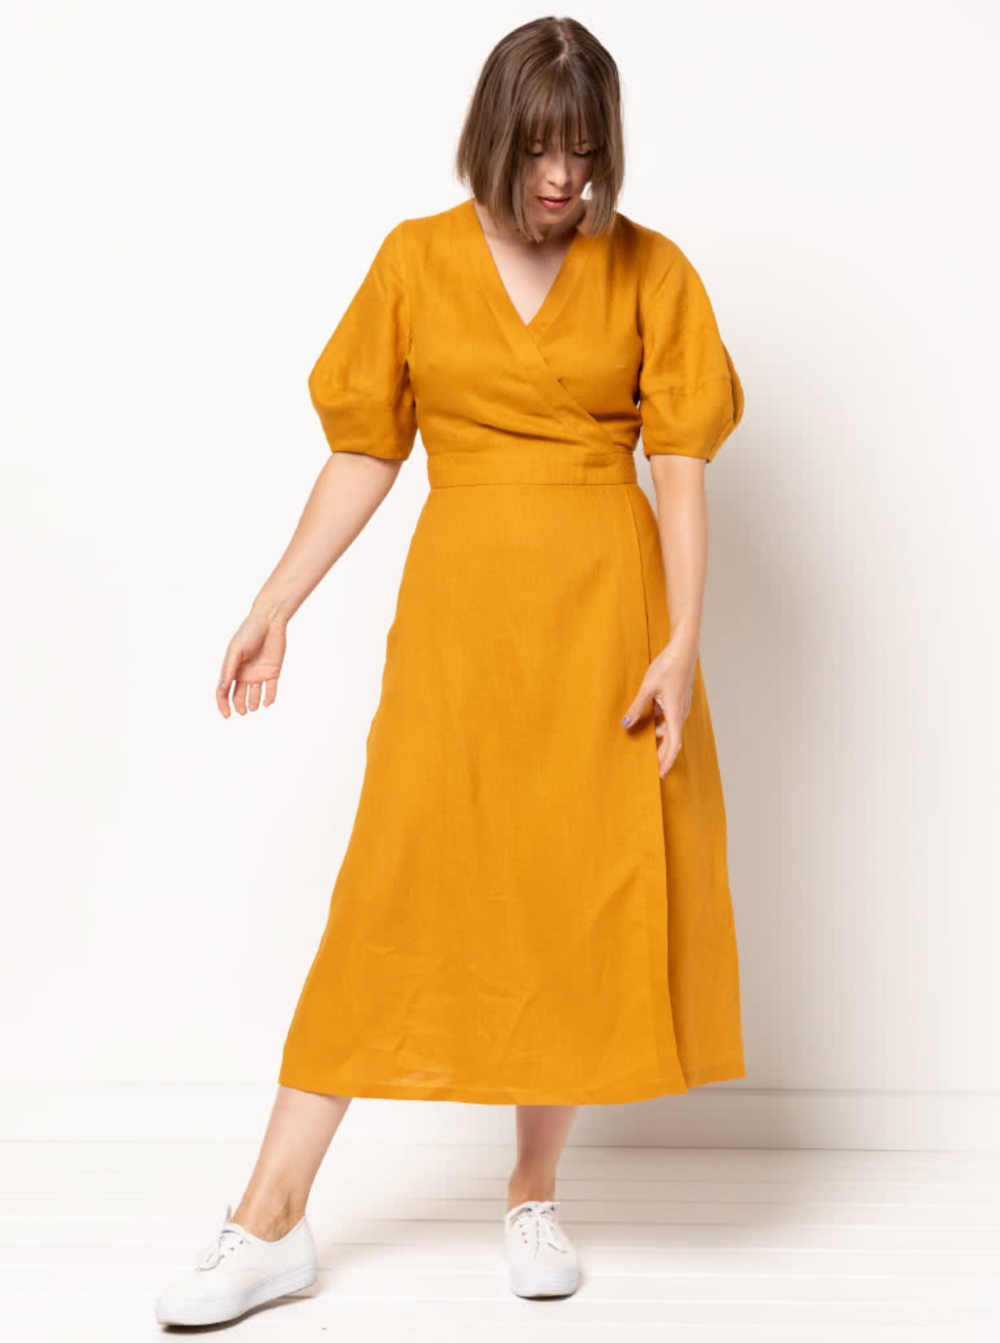 Woman wearing the Millicent Wrap Dress sewing pattern from Style Arc on The Fold Line. A wrap dress pattern made in linen, silk, crepe or rayon fabrics, featuring a wrap bodice and skirt with tie closure, neck and waist bands, bust darts, tuck details on 